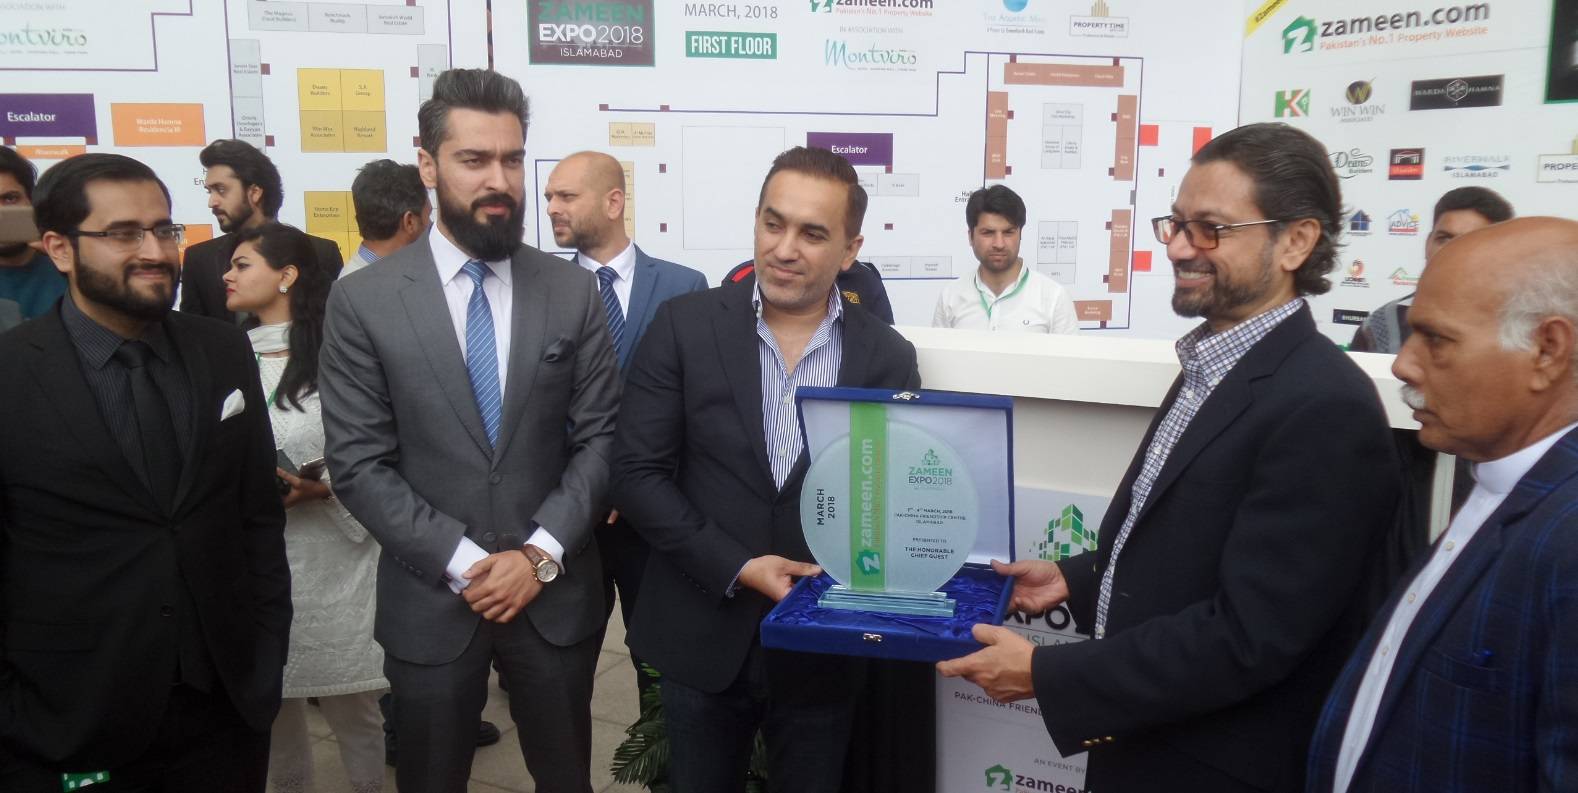 Zameen Expo becomes Pakistan’s most Trusted Real Estate Exhibitions Brand